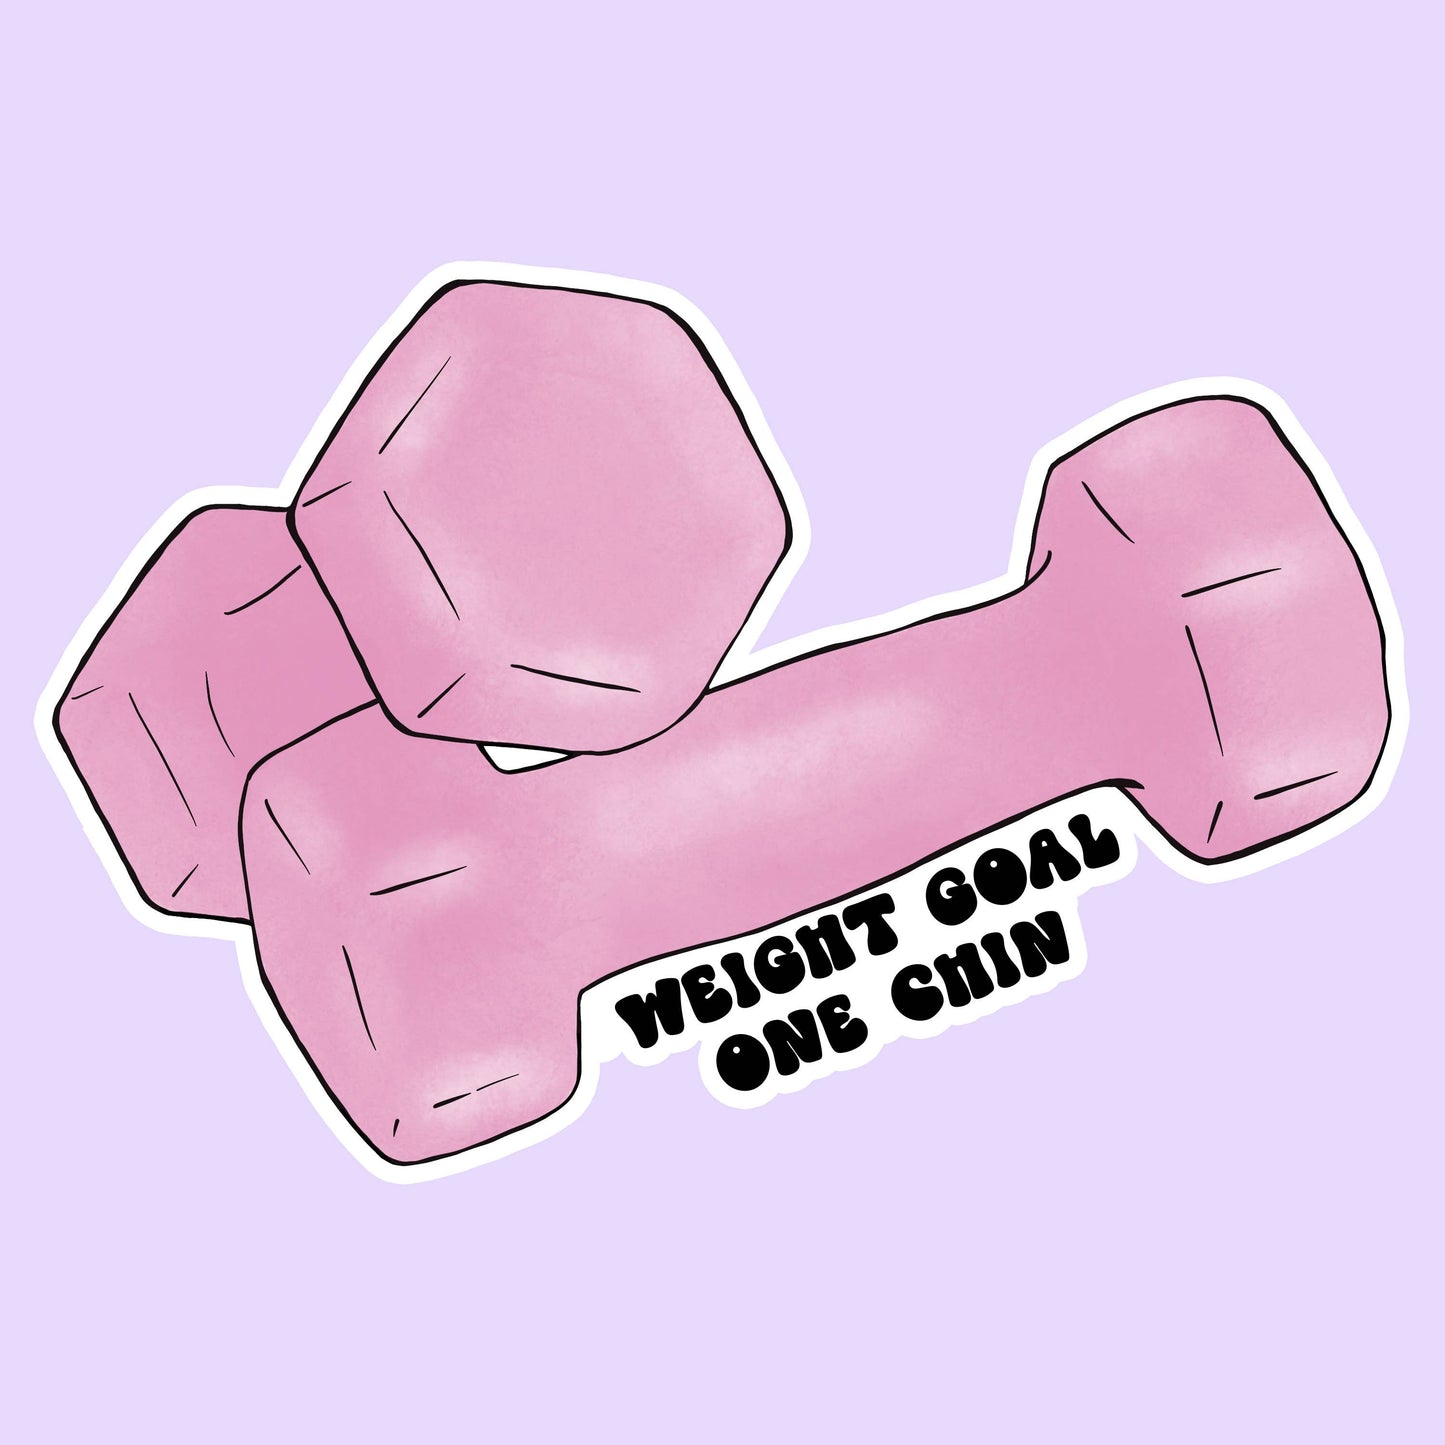 Weight Goal One Chin Funny Fitness Sticker Decal